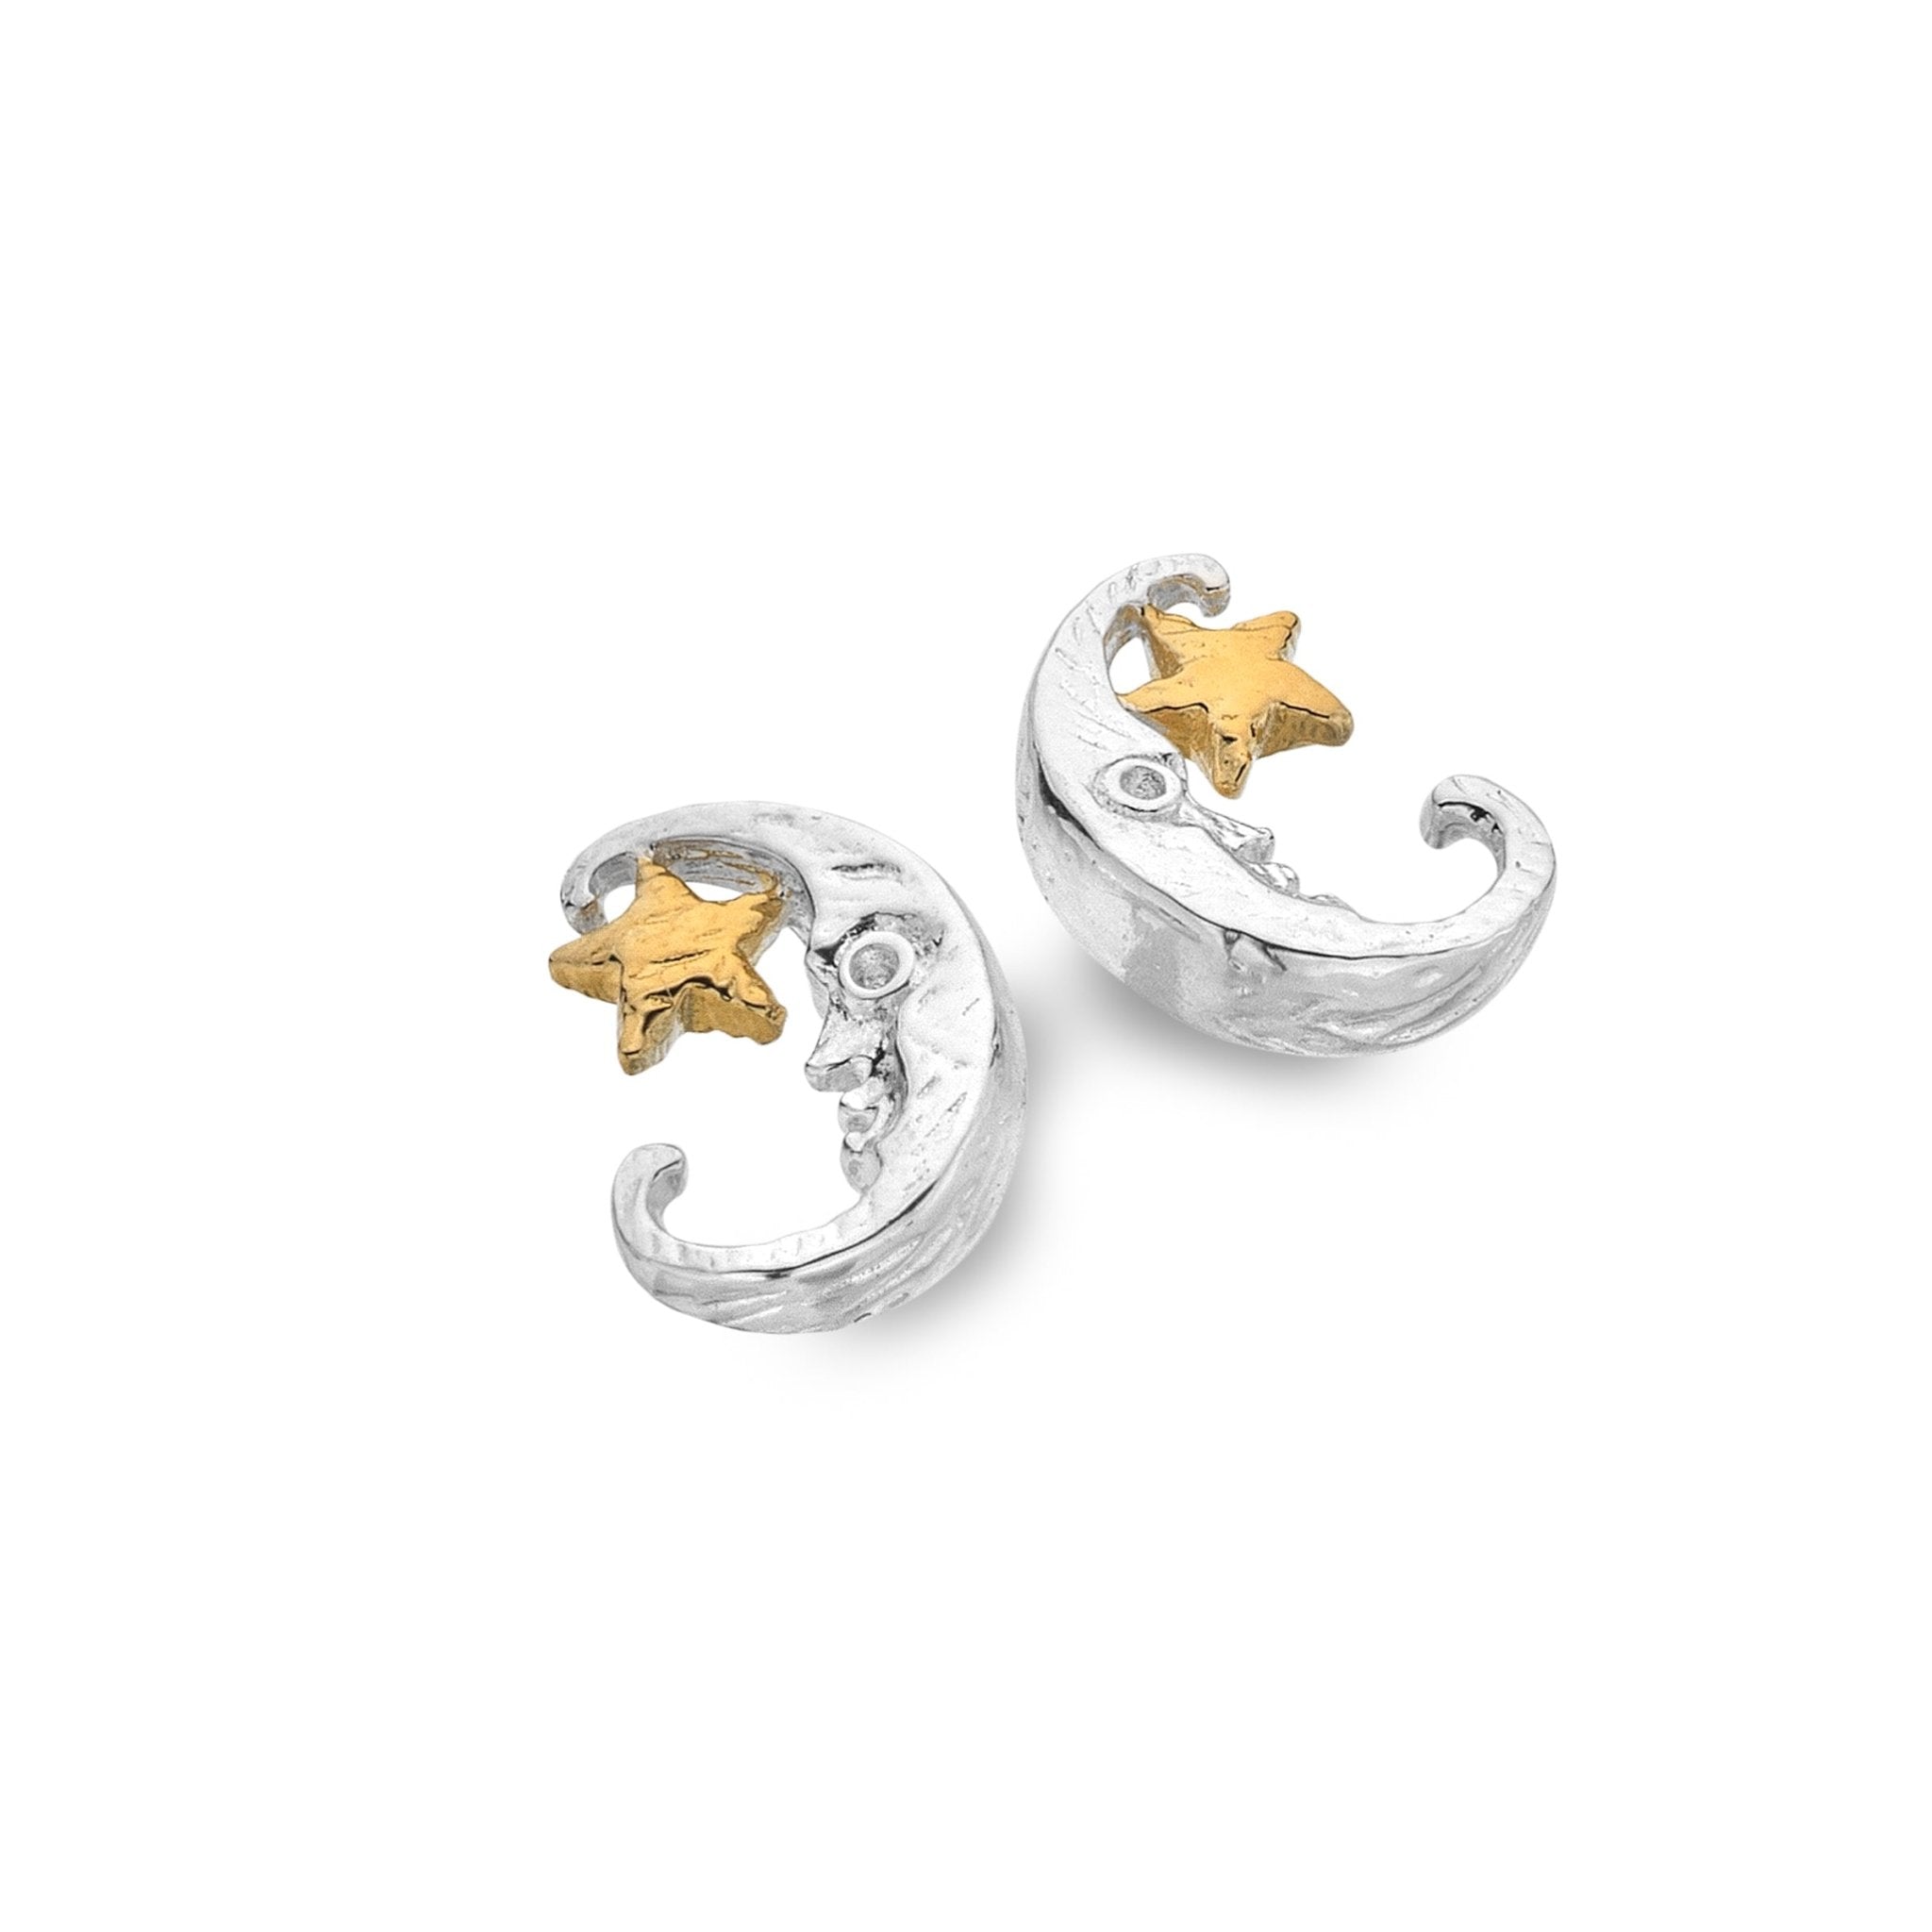 Moon & Star Earring and Cuff Set | Moon and star earrings, Cuff earrings,  Stud earrings set